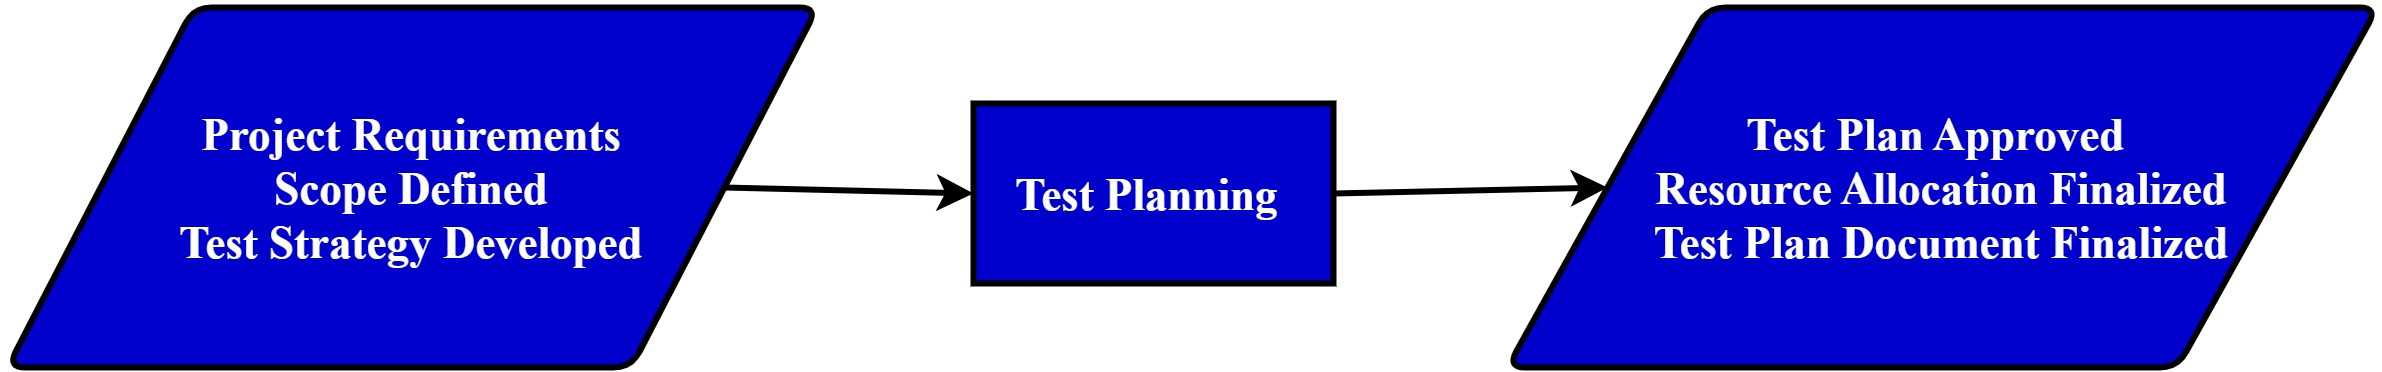 Entry and exit criteria for Test Planning Phase